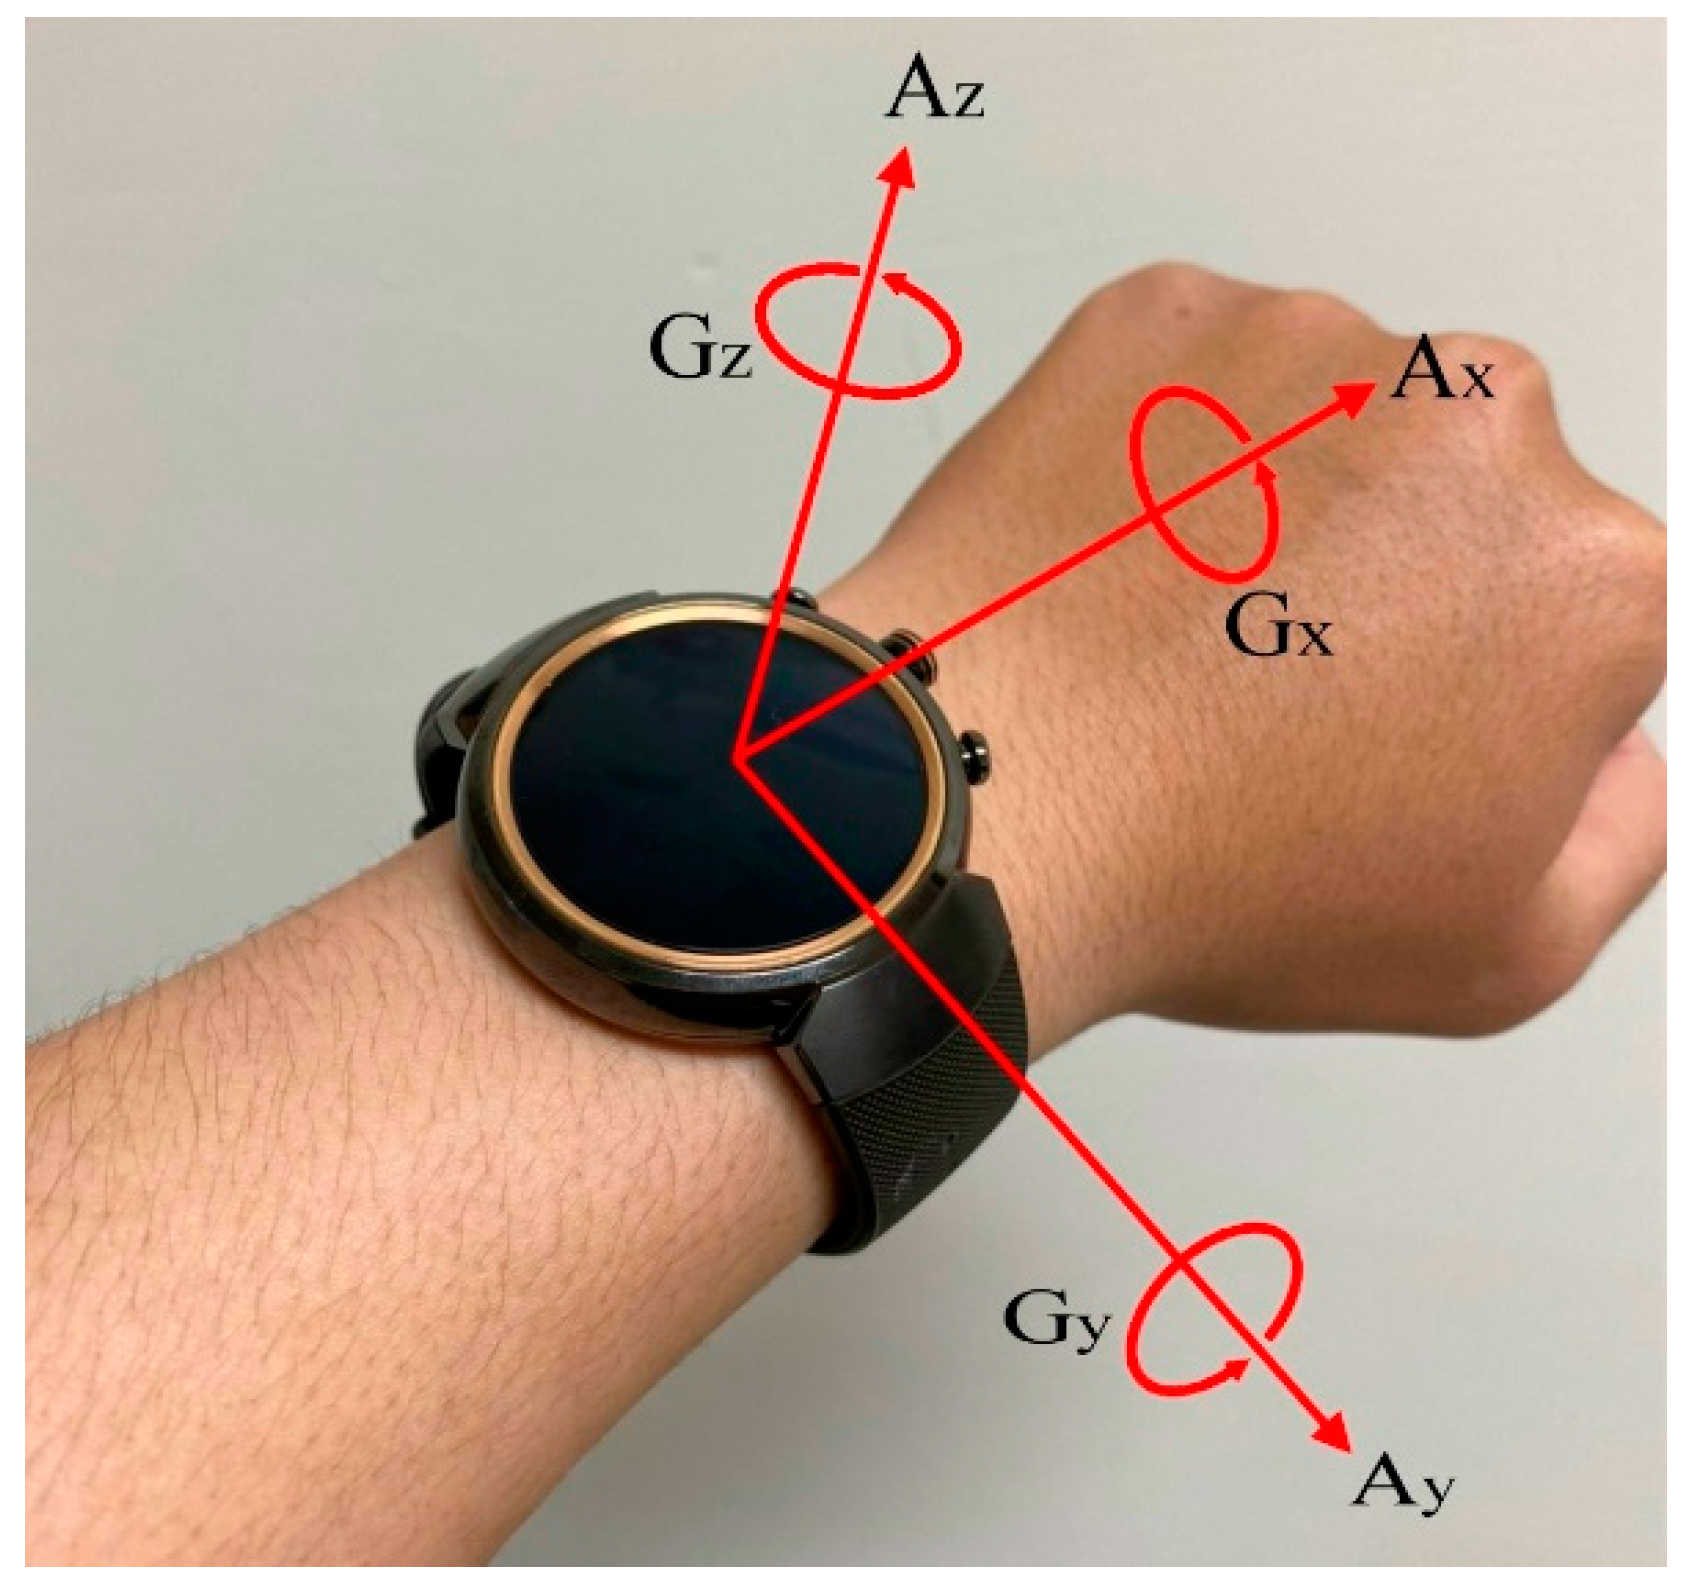 Applied Sciences | Free Full-Text | Quantitative Analysis of Movements in  Children with Attention-Deficit Hyperactivity Disorder Using a Smart Watch  at School